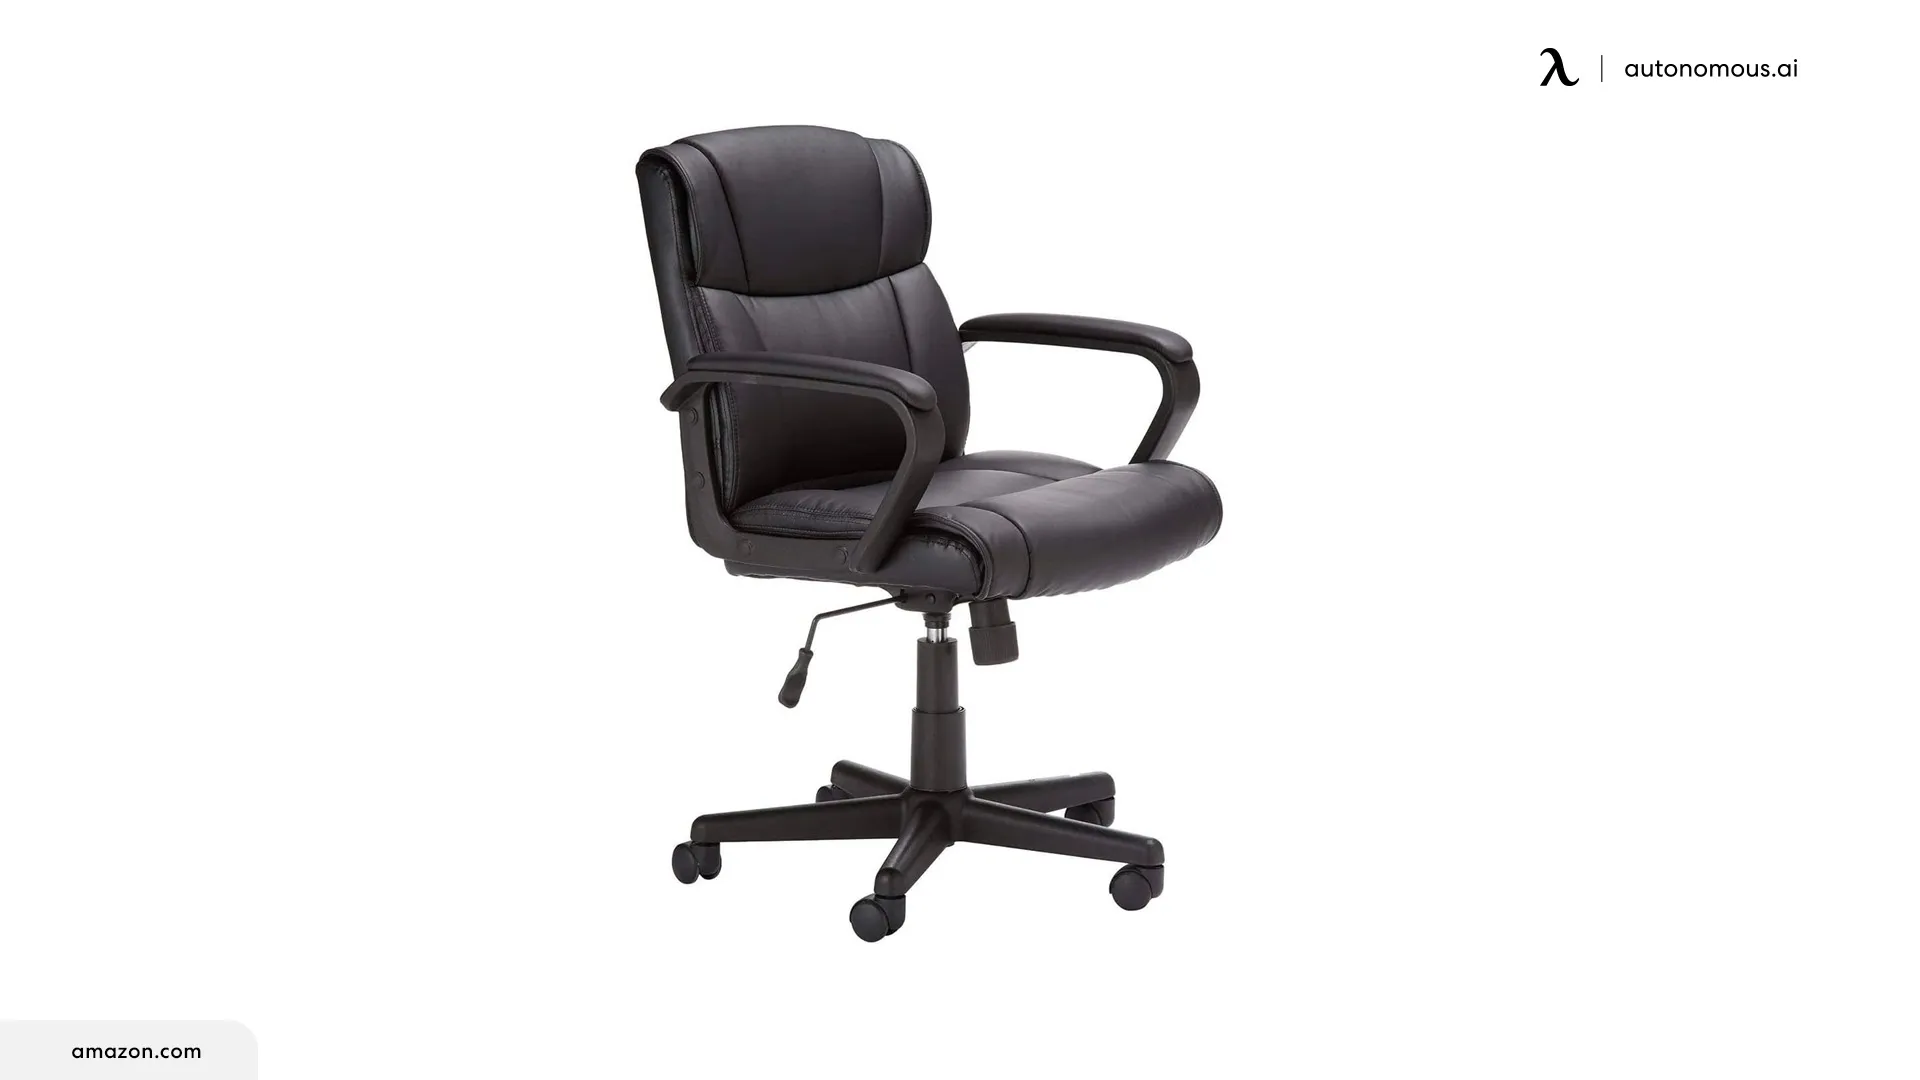 Amazon Basics Padded Office Desk Chair with Armrests